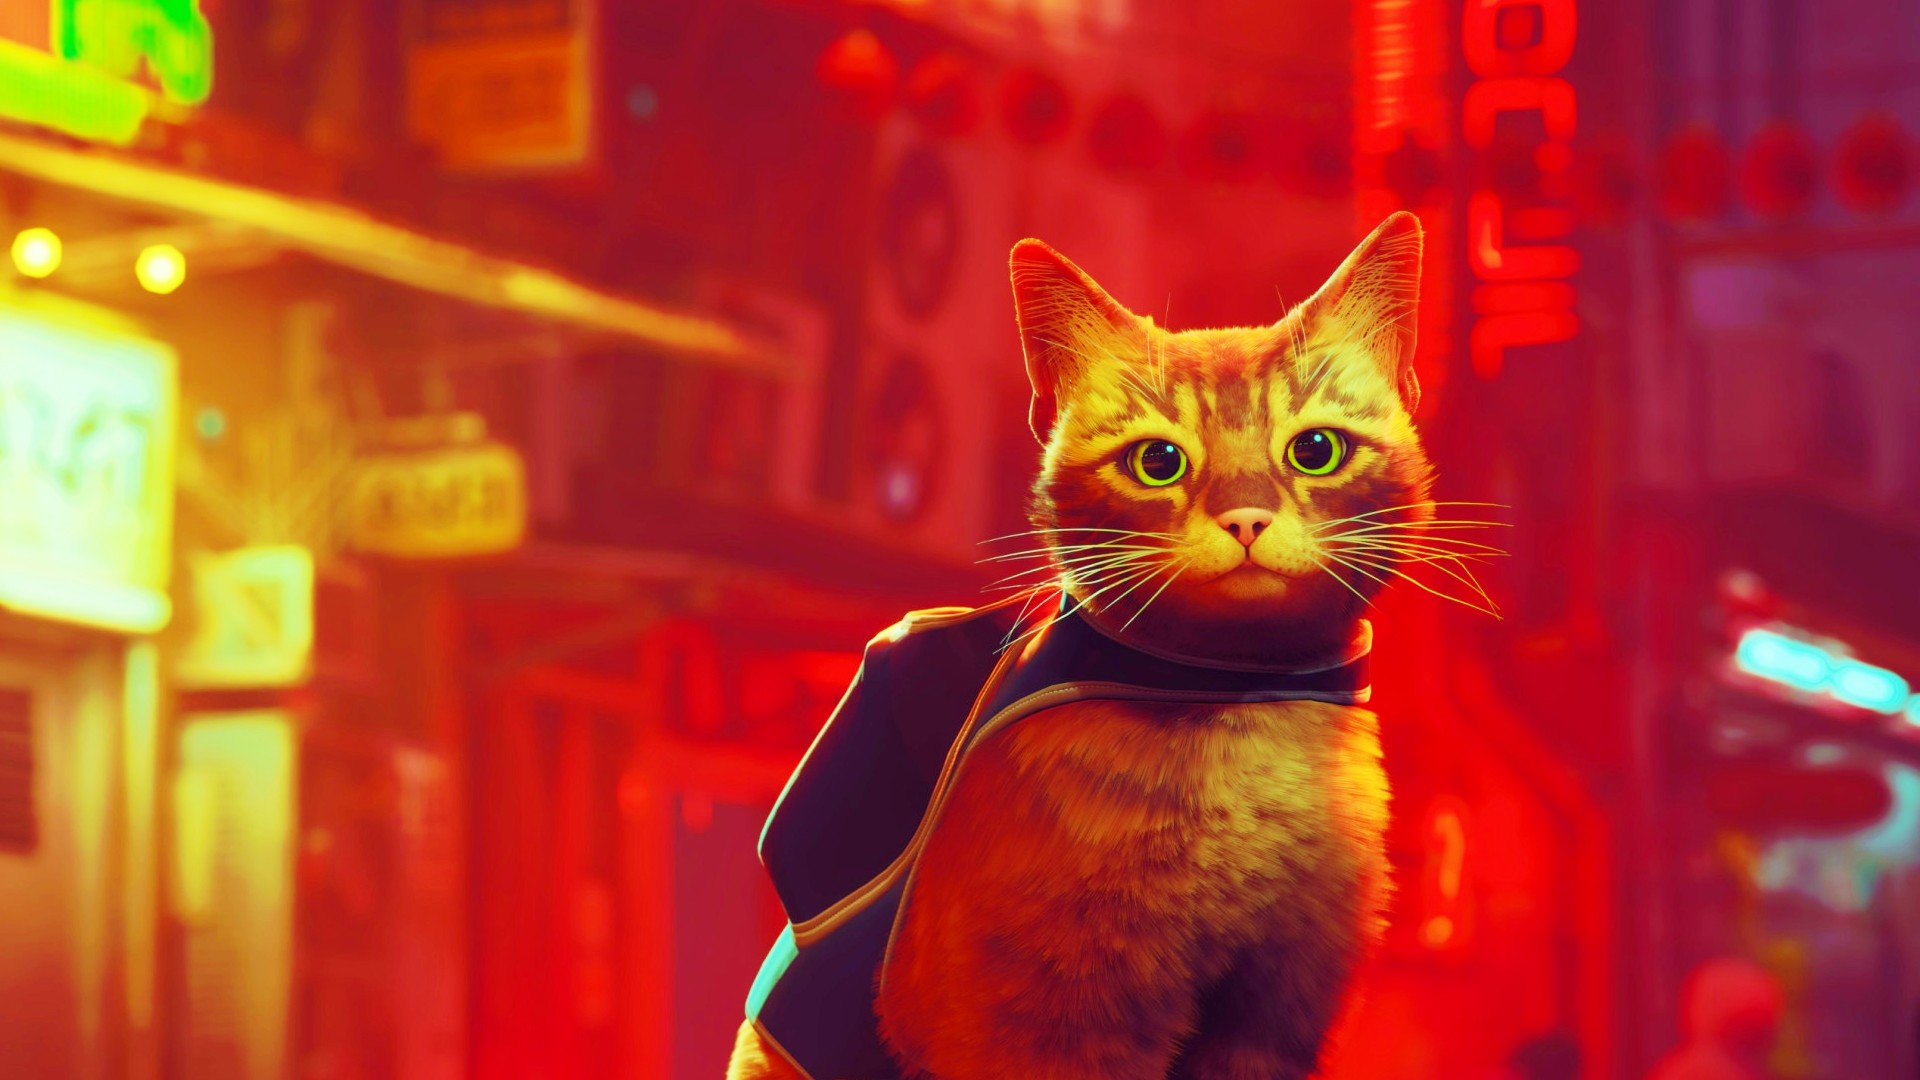 This Stray backpack turns your cat into a cosplayer